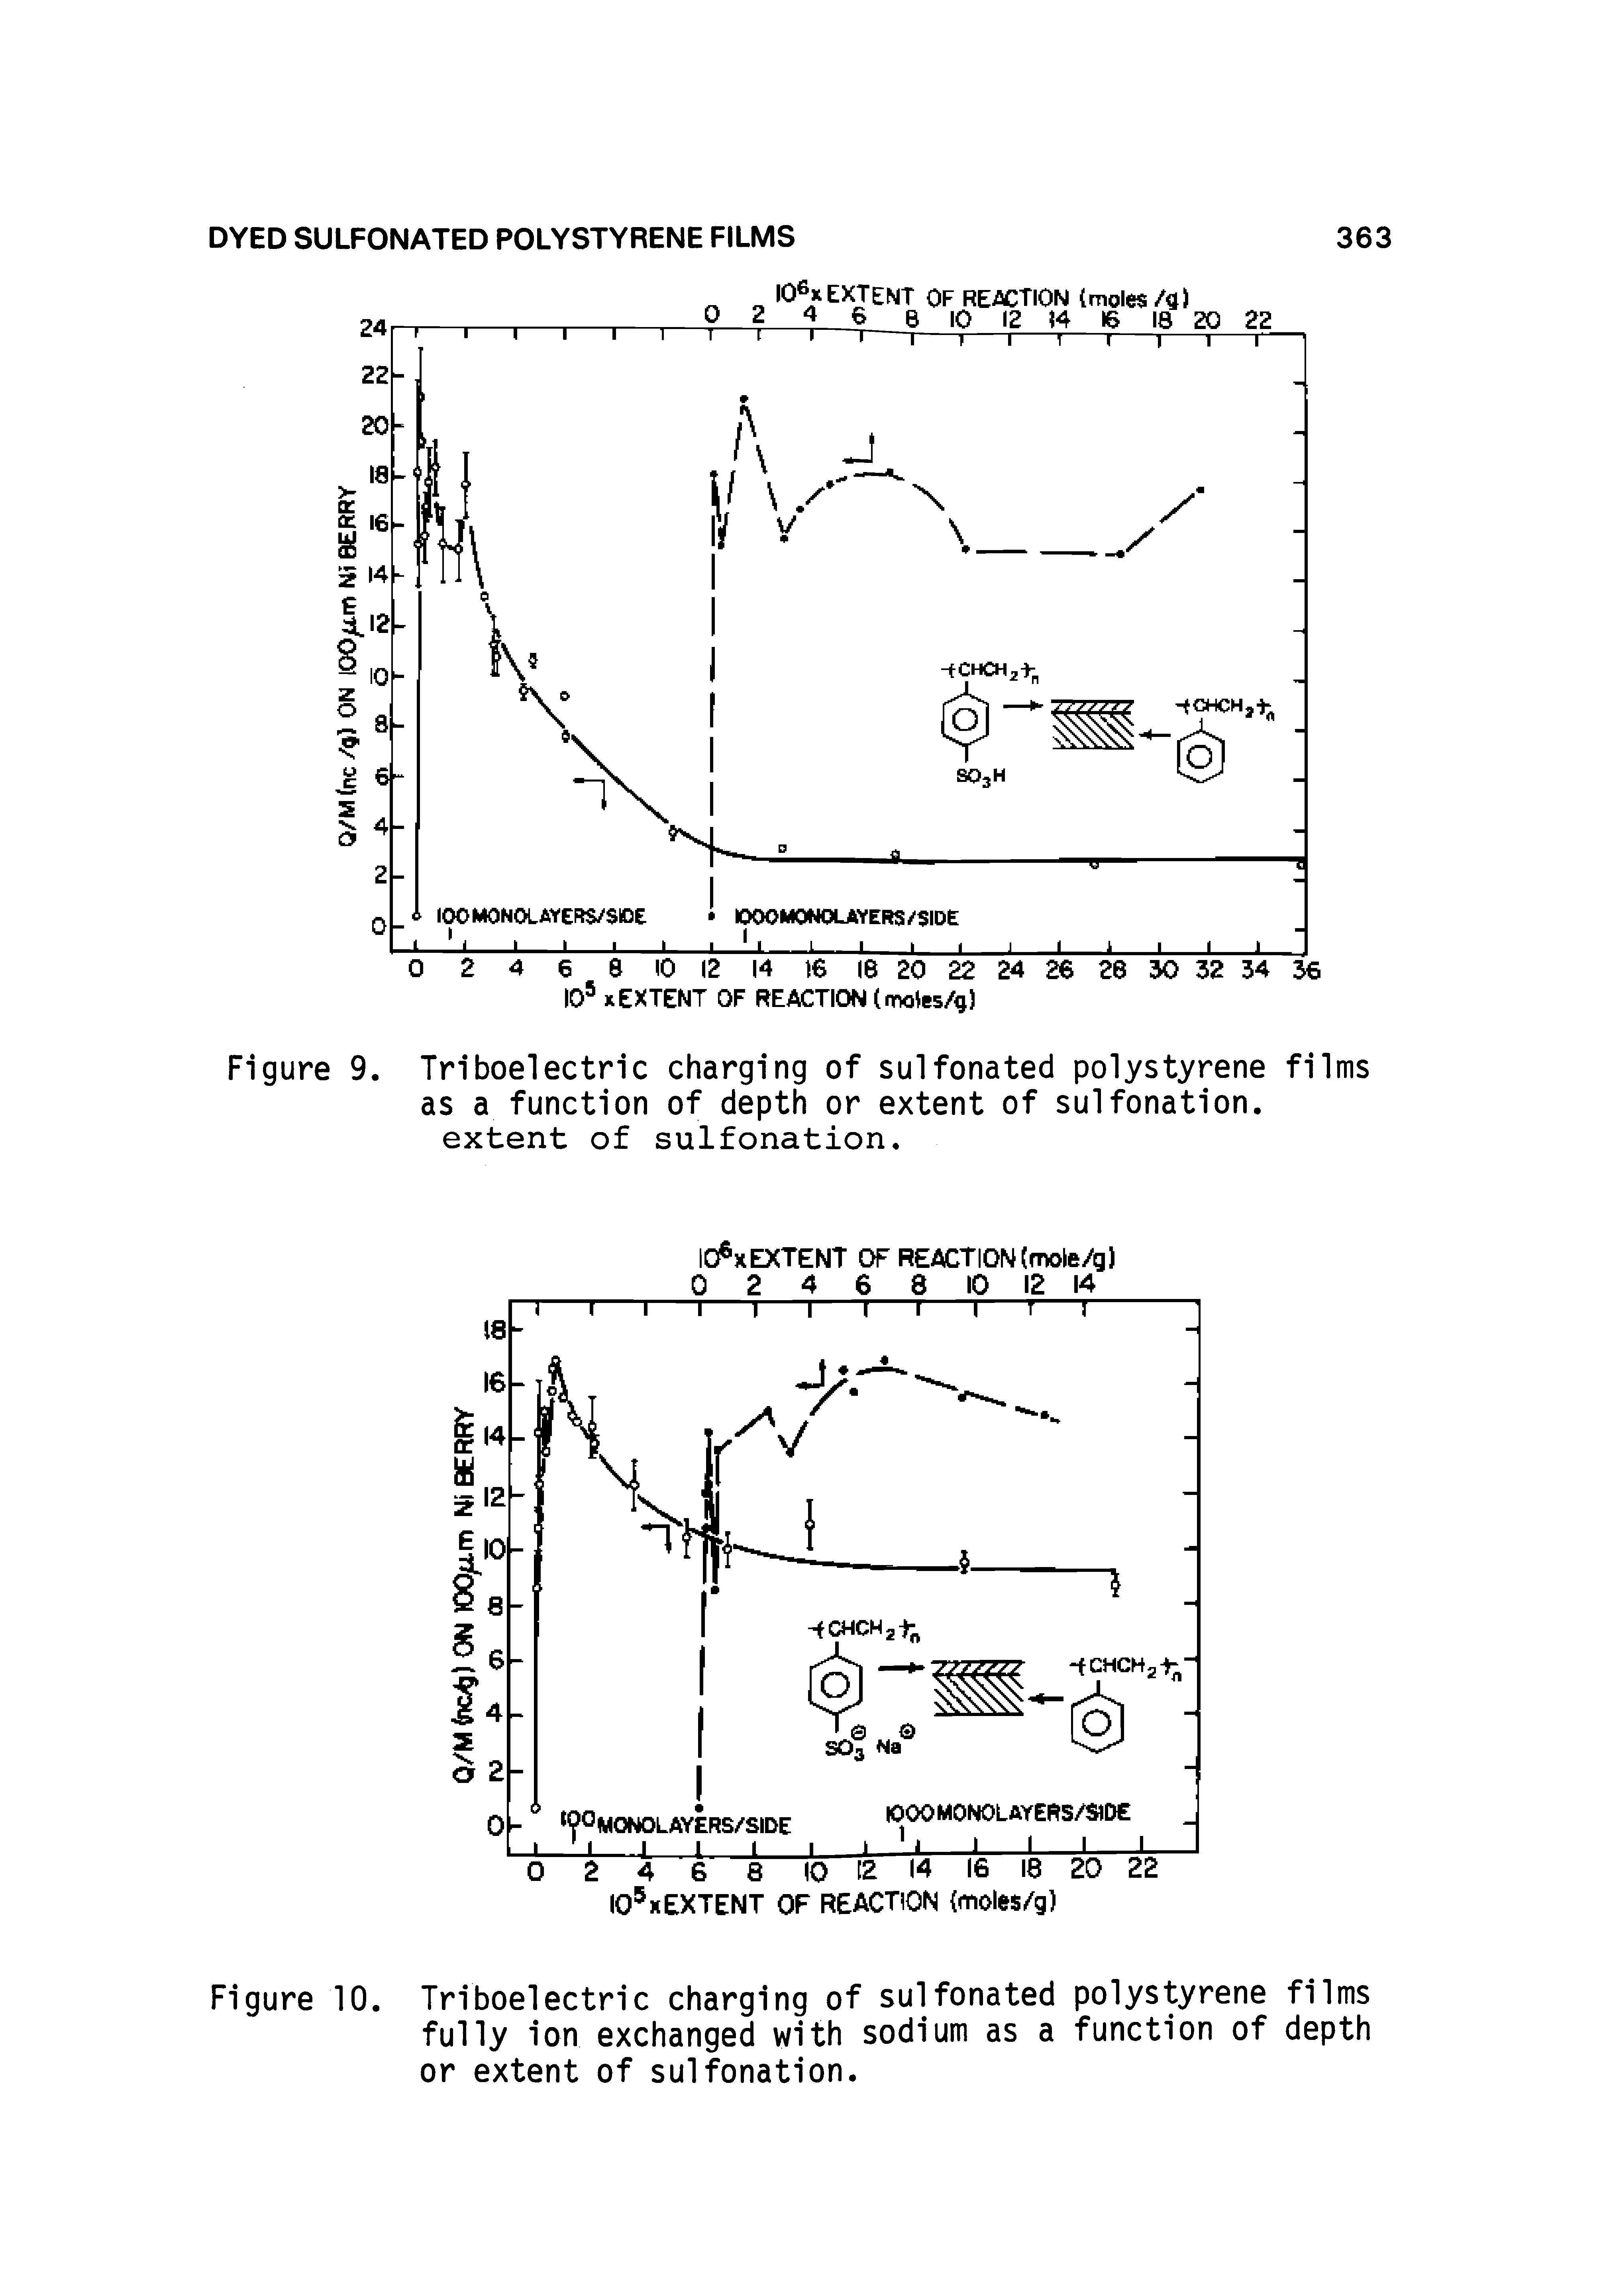 Figure 9. Triboelectric charging of sulfonated polystyrene films as a function of depth or extent of sulfonation. extent of sulfonation.